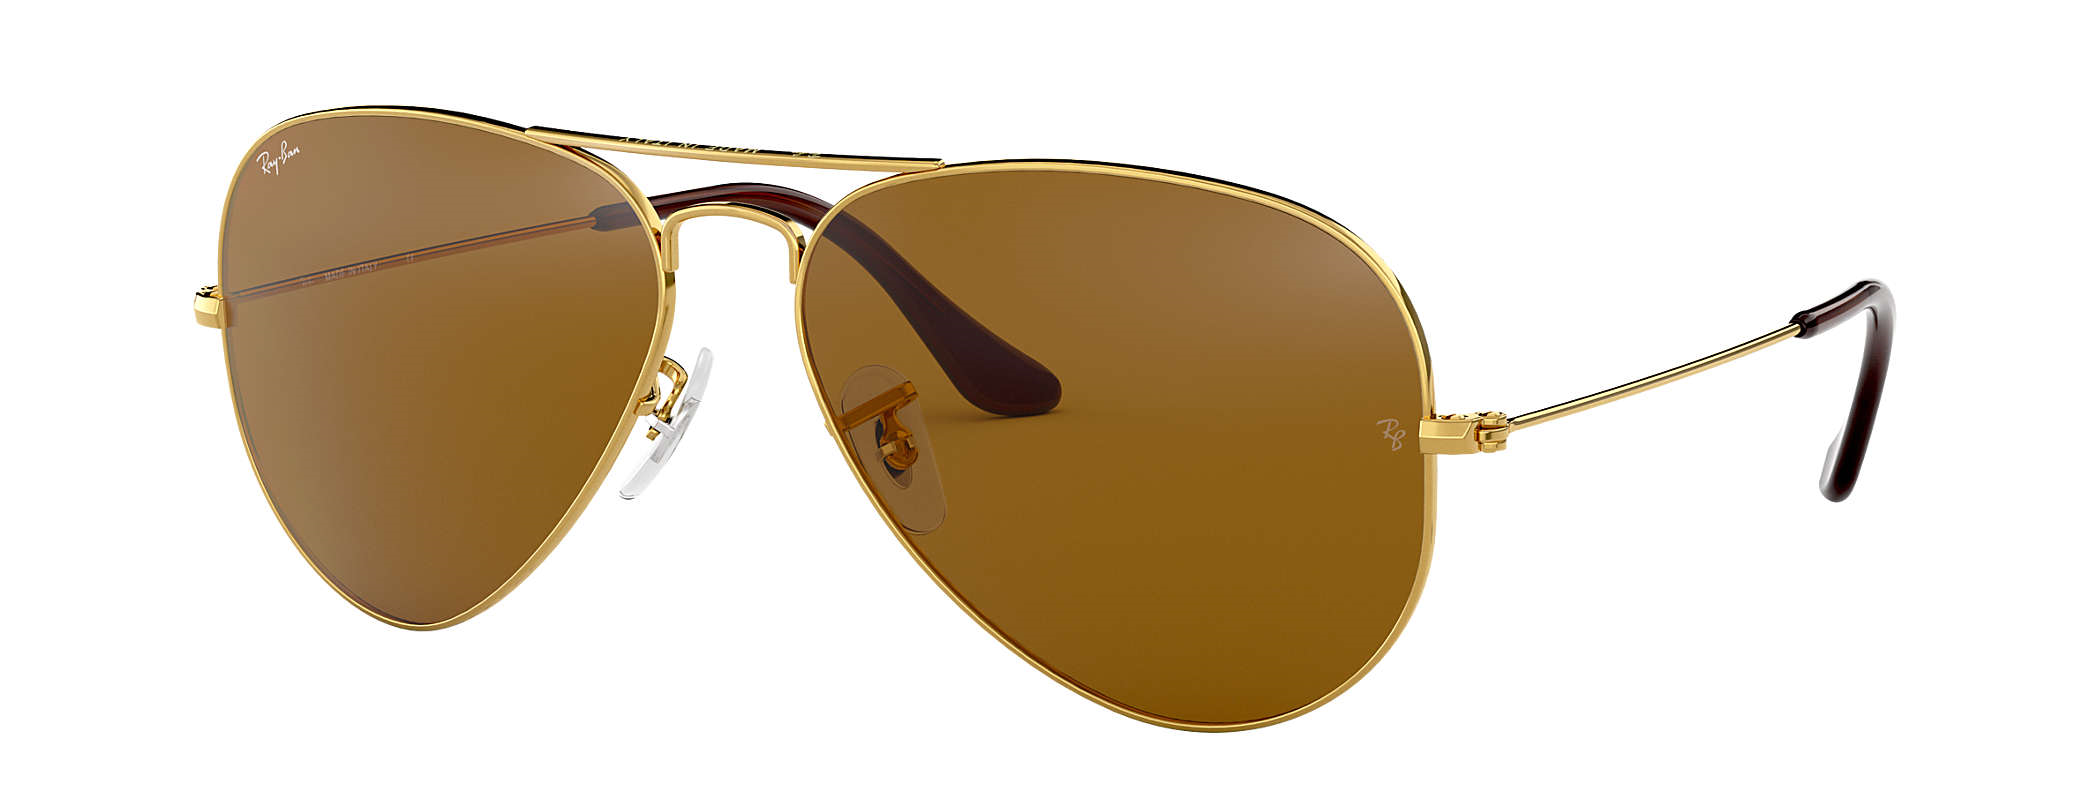 Ray-Ban Aviator Size Guide: Which Is Your Perfect Fit?